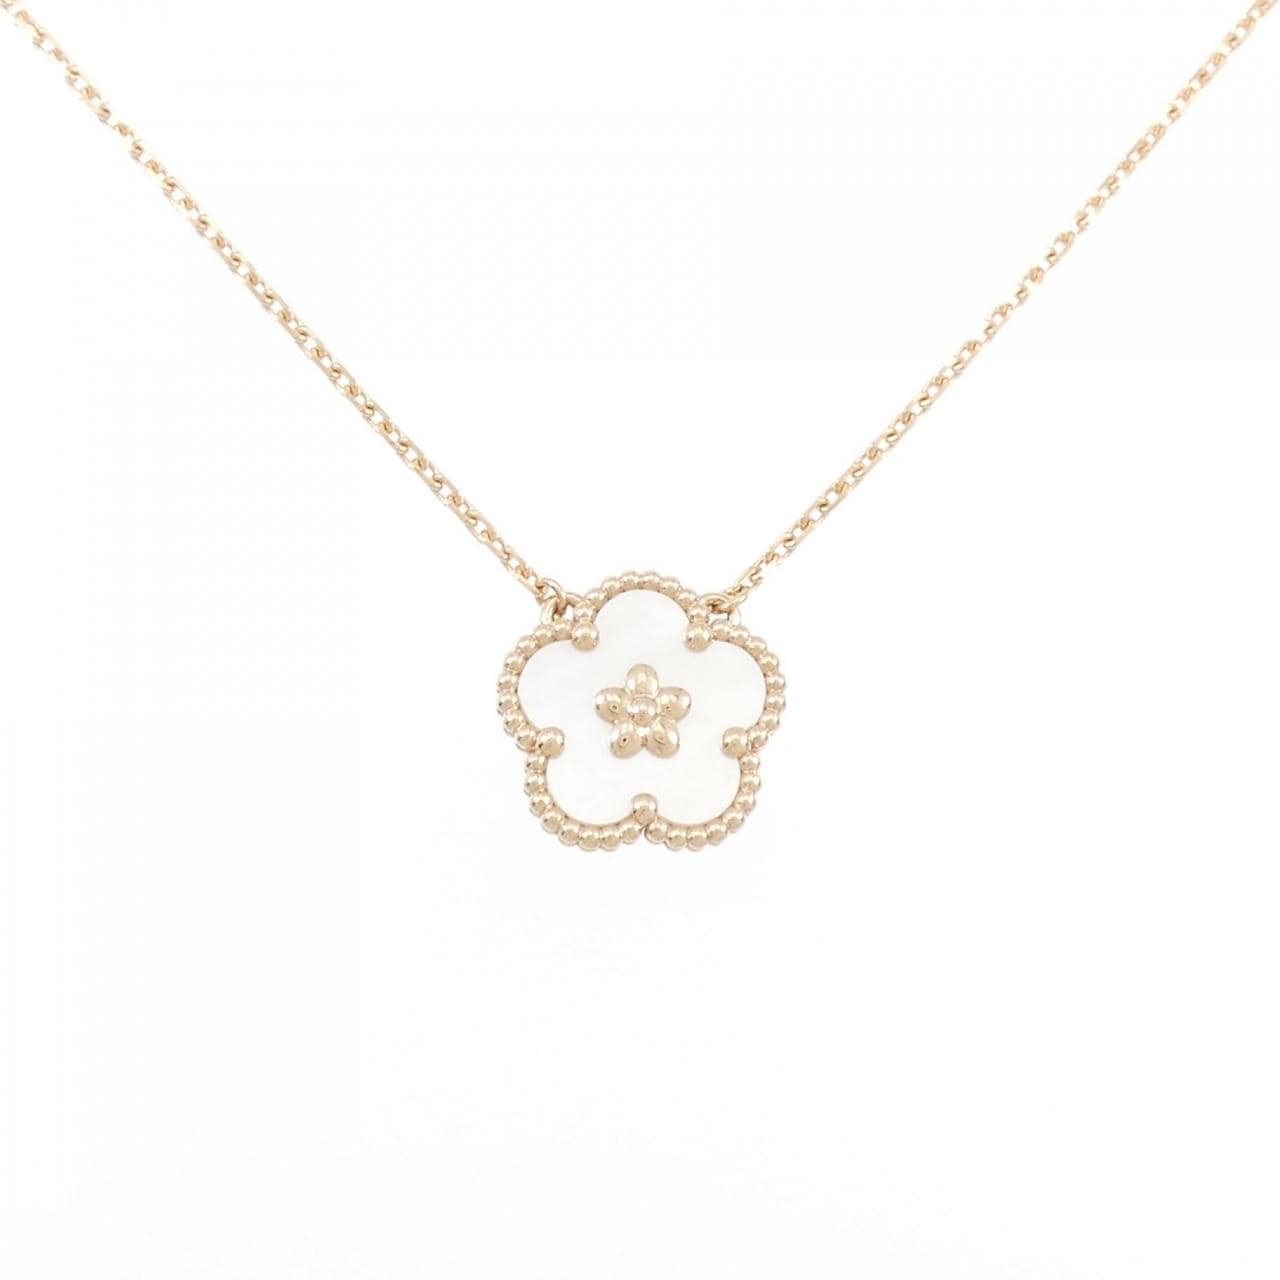 Van Cleef & Arpels Lucky Spring Plum Blossom Necklace